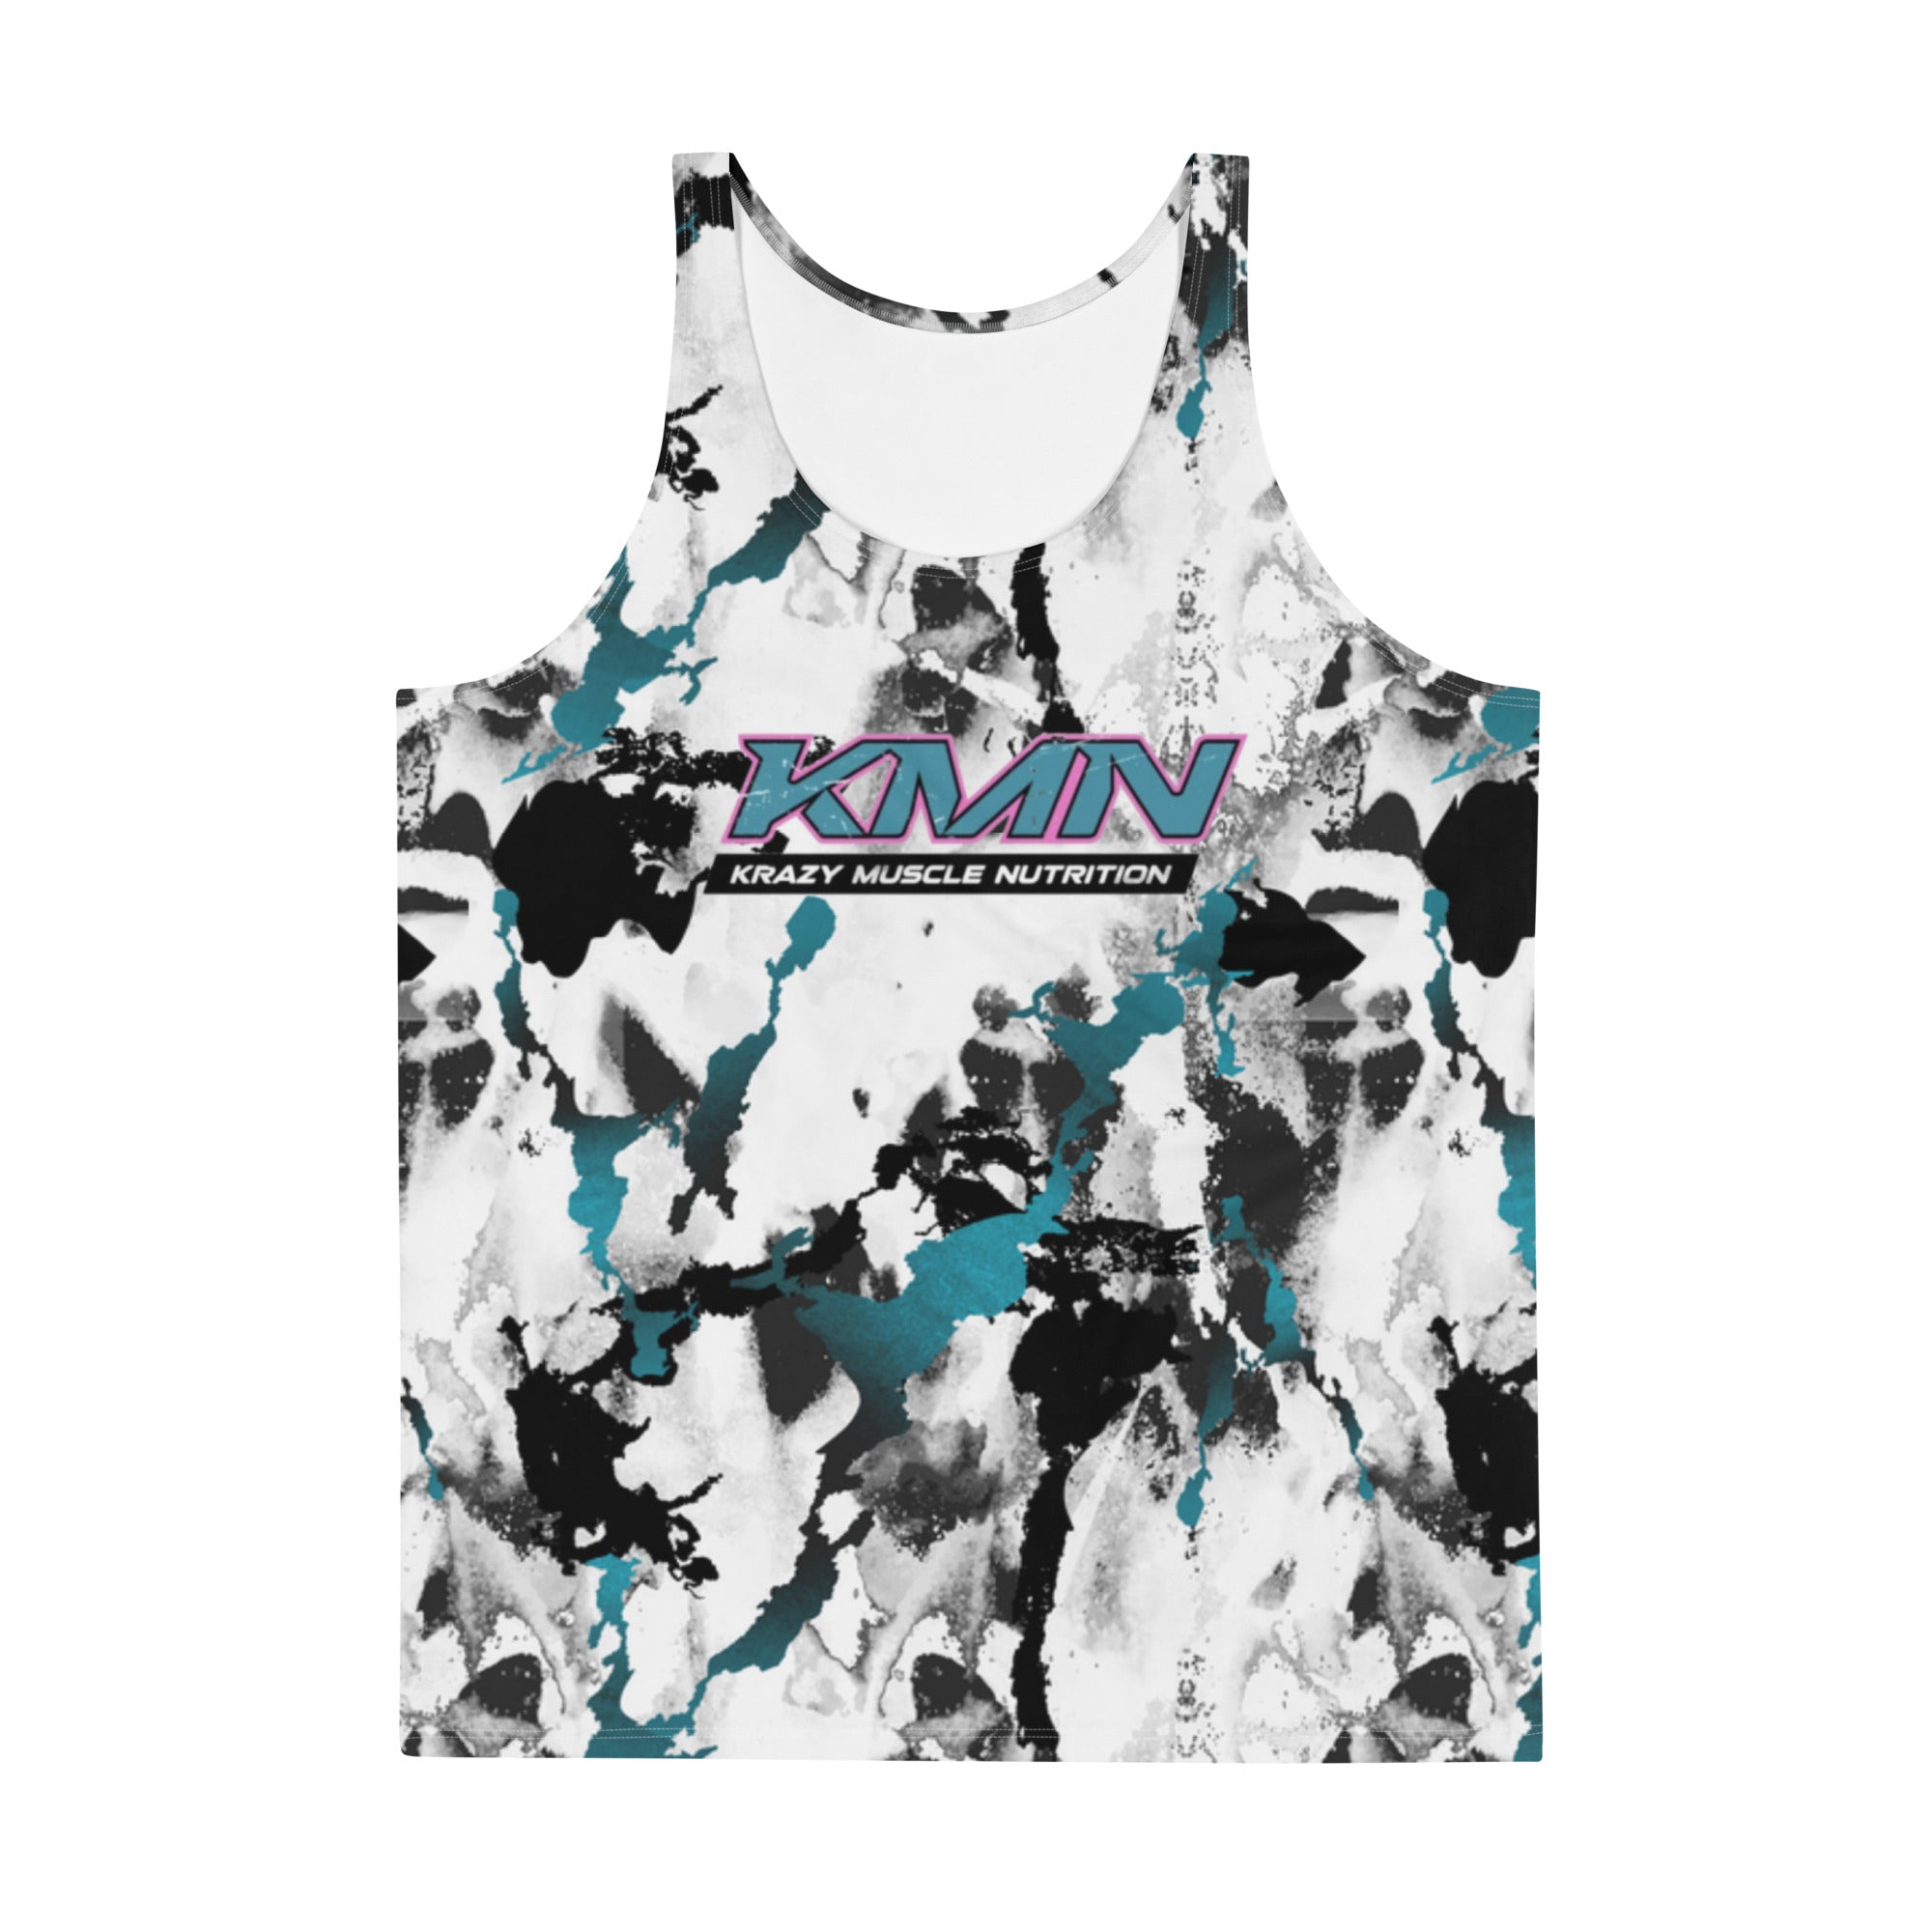 Marbled Muscle Tank - Krazy Muscle Nutrition Krazy Muscle Nutrition4772098_9049